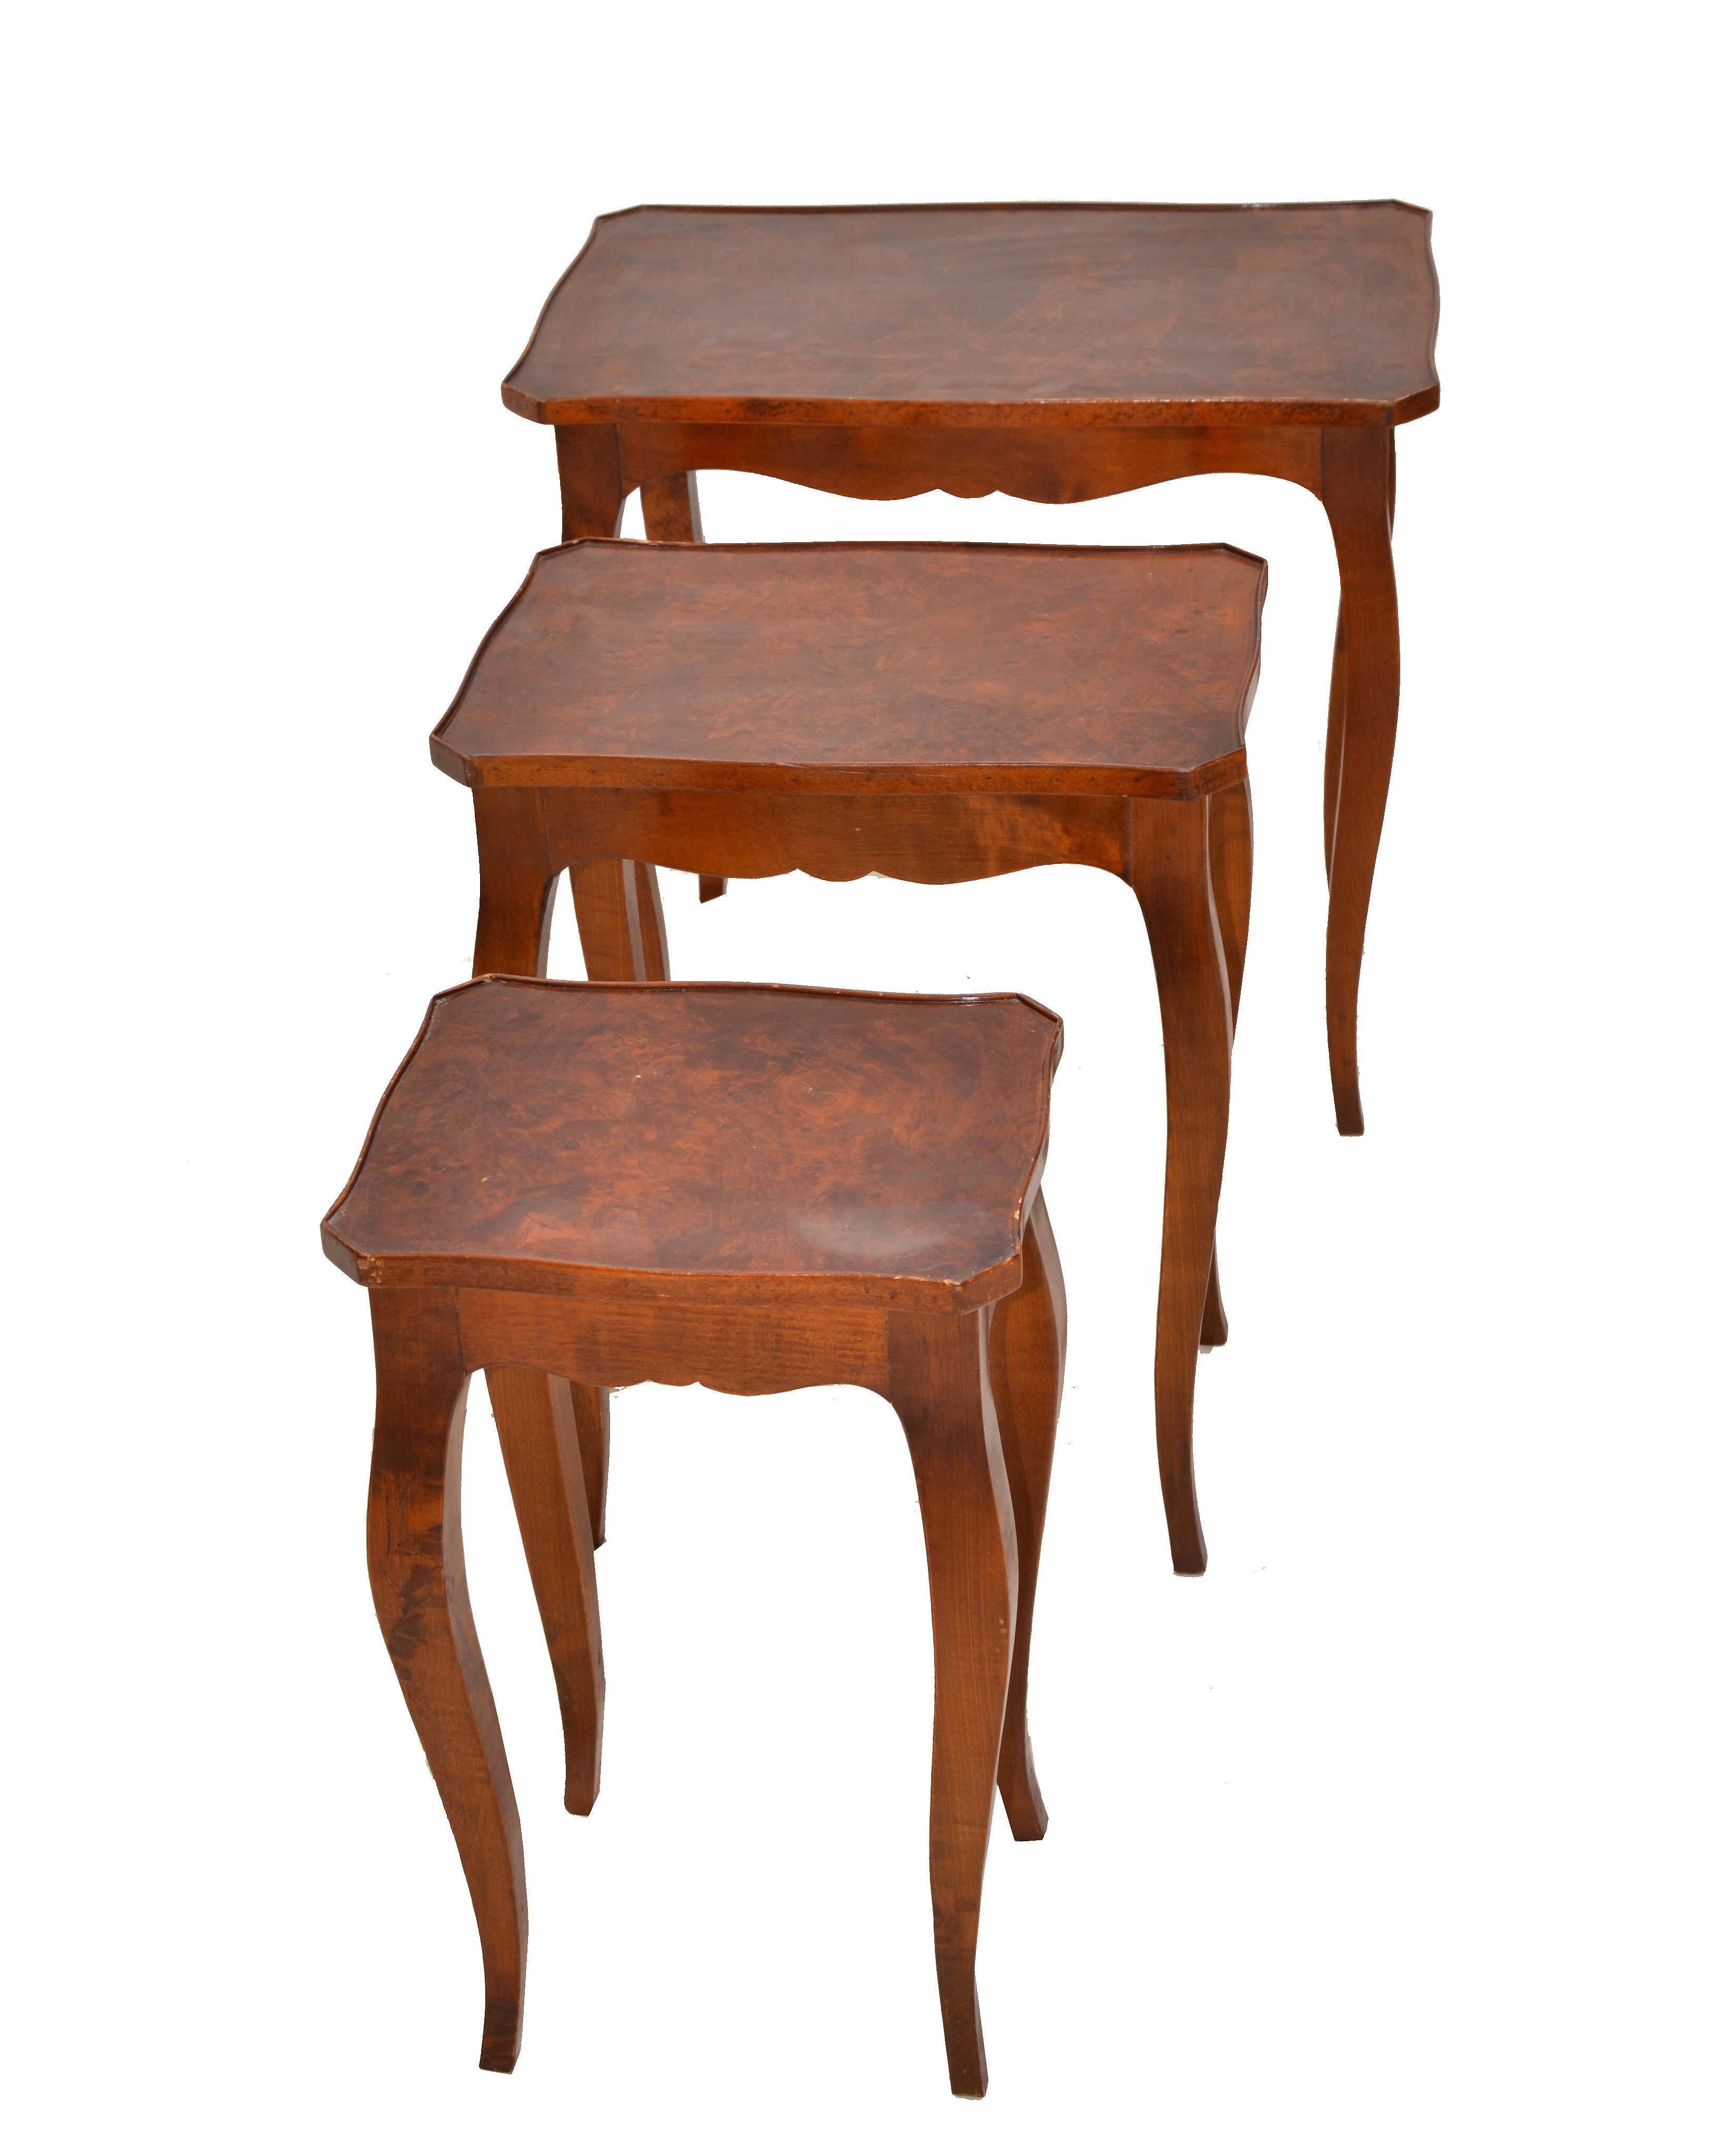 Set of 3 Spanish Colonial Empire style nesting tables or stacking tables in olive wood and hand carved curved legs. 

Size of each table:
15.63 D x 20 L x 23.63 inches H.
12.5 D x 17.38 L x 21.5 inches H.
10 D x 12.25 L x 20 inches H.